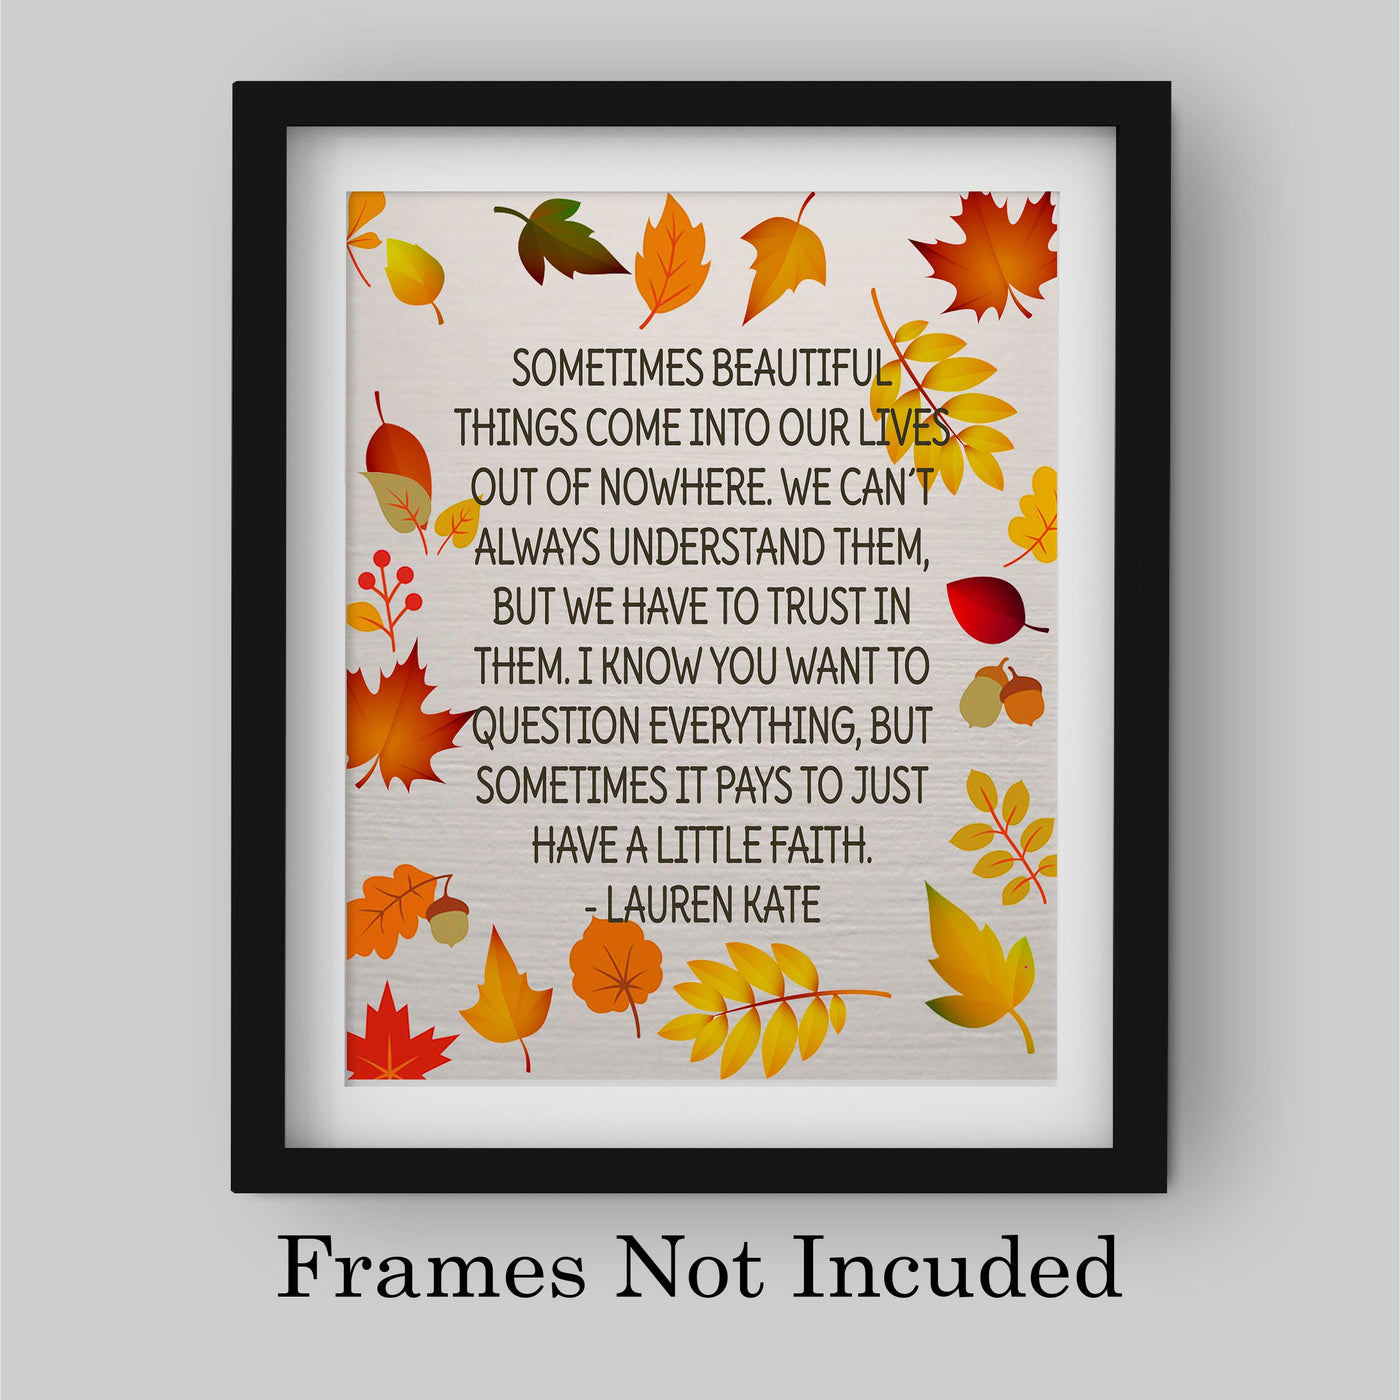 Lauren Kate Quotes-"Sometimes It Pays to Have a Little Faith" Motivational Quotes Wall Art -8 x 10" Typographic Print w/Fall Leaves-Ready to Frame. Inspirational Decor for Home-Office-Studio-School!